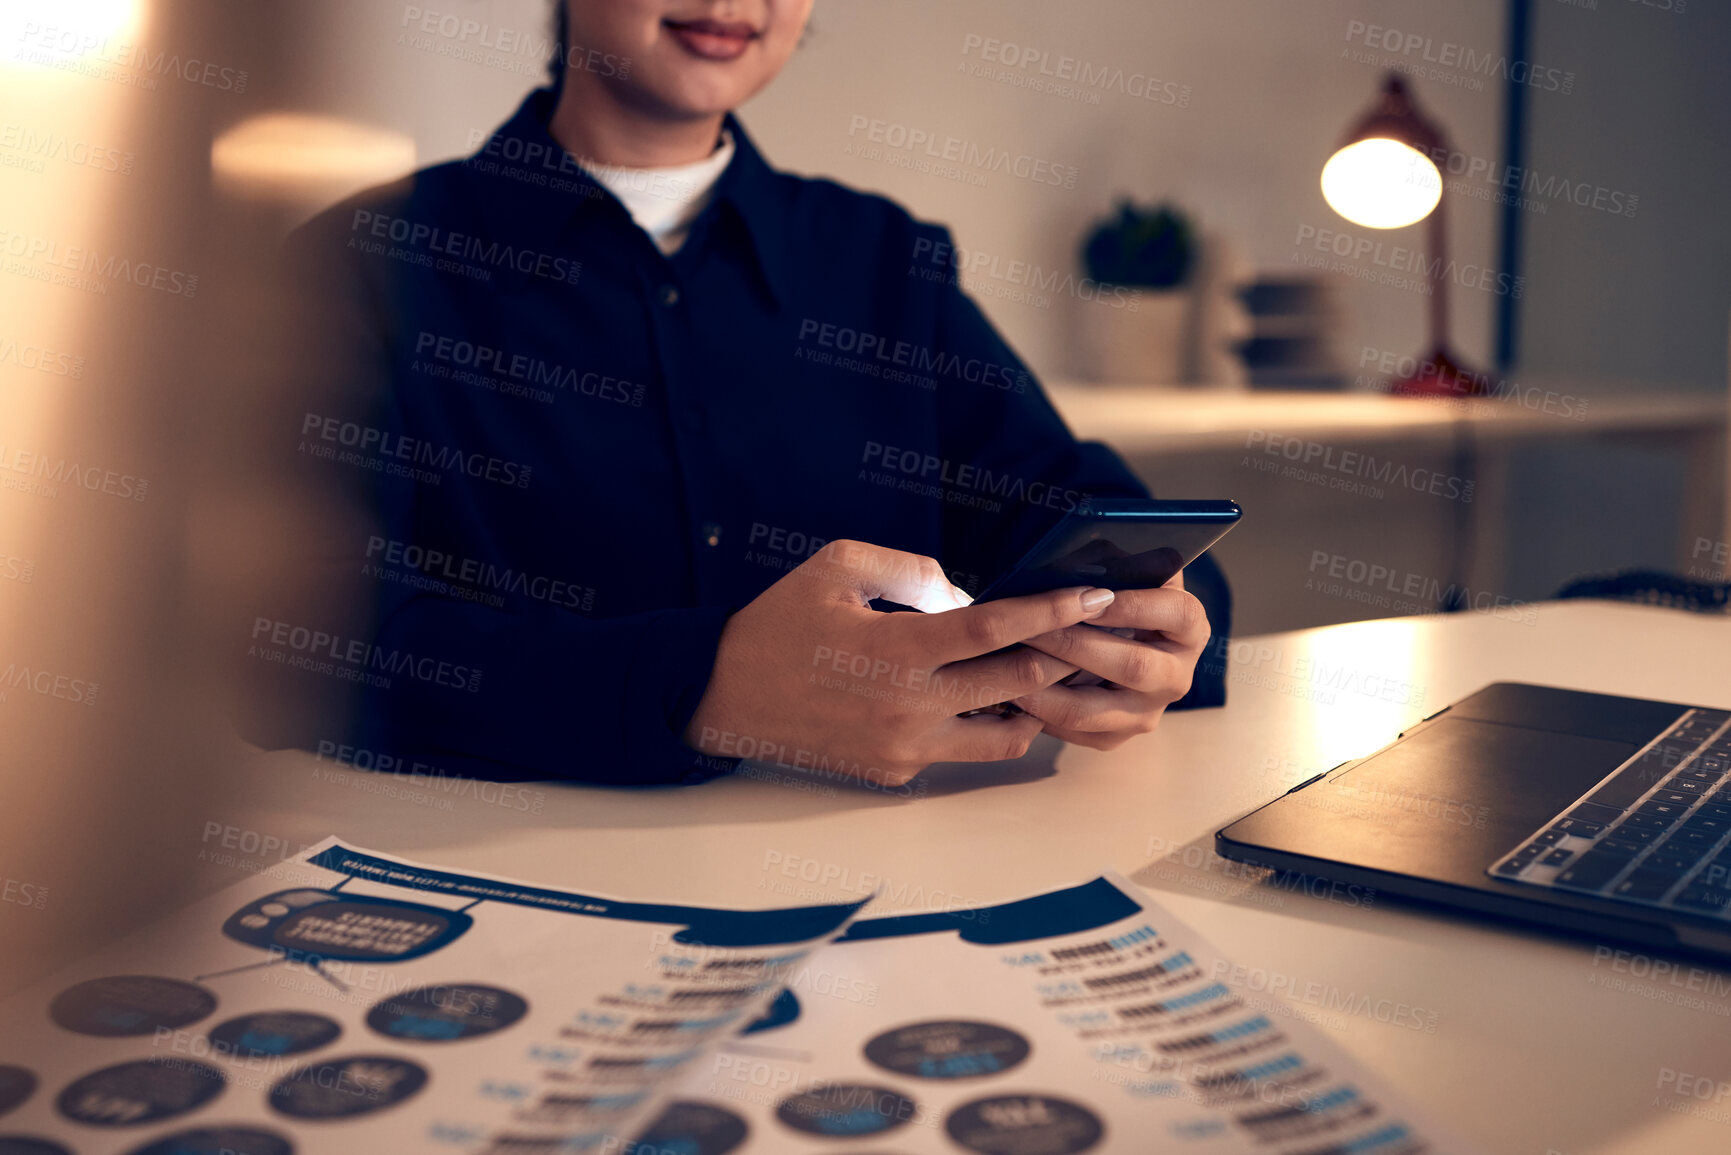 Buy stock photo Business woman, hands and phone in office for texting, web browsing or social media. Technology, cellphone and female employee with mobile smartphone for networking or internet scrolling at night.